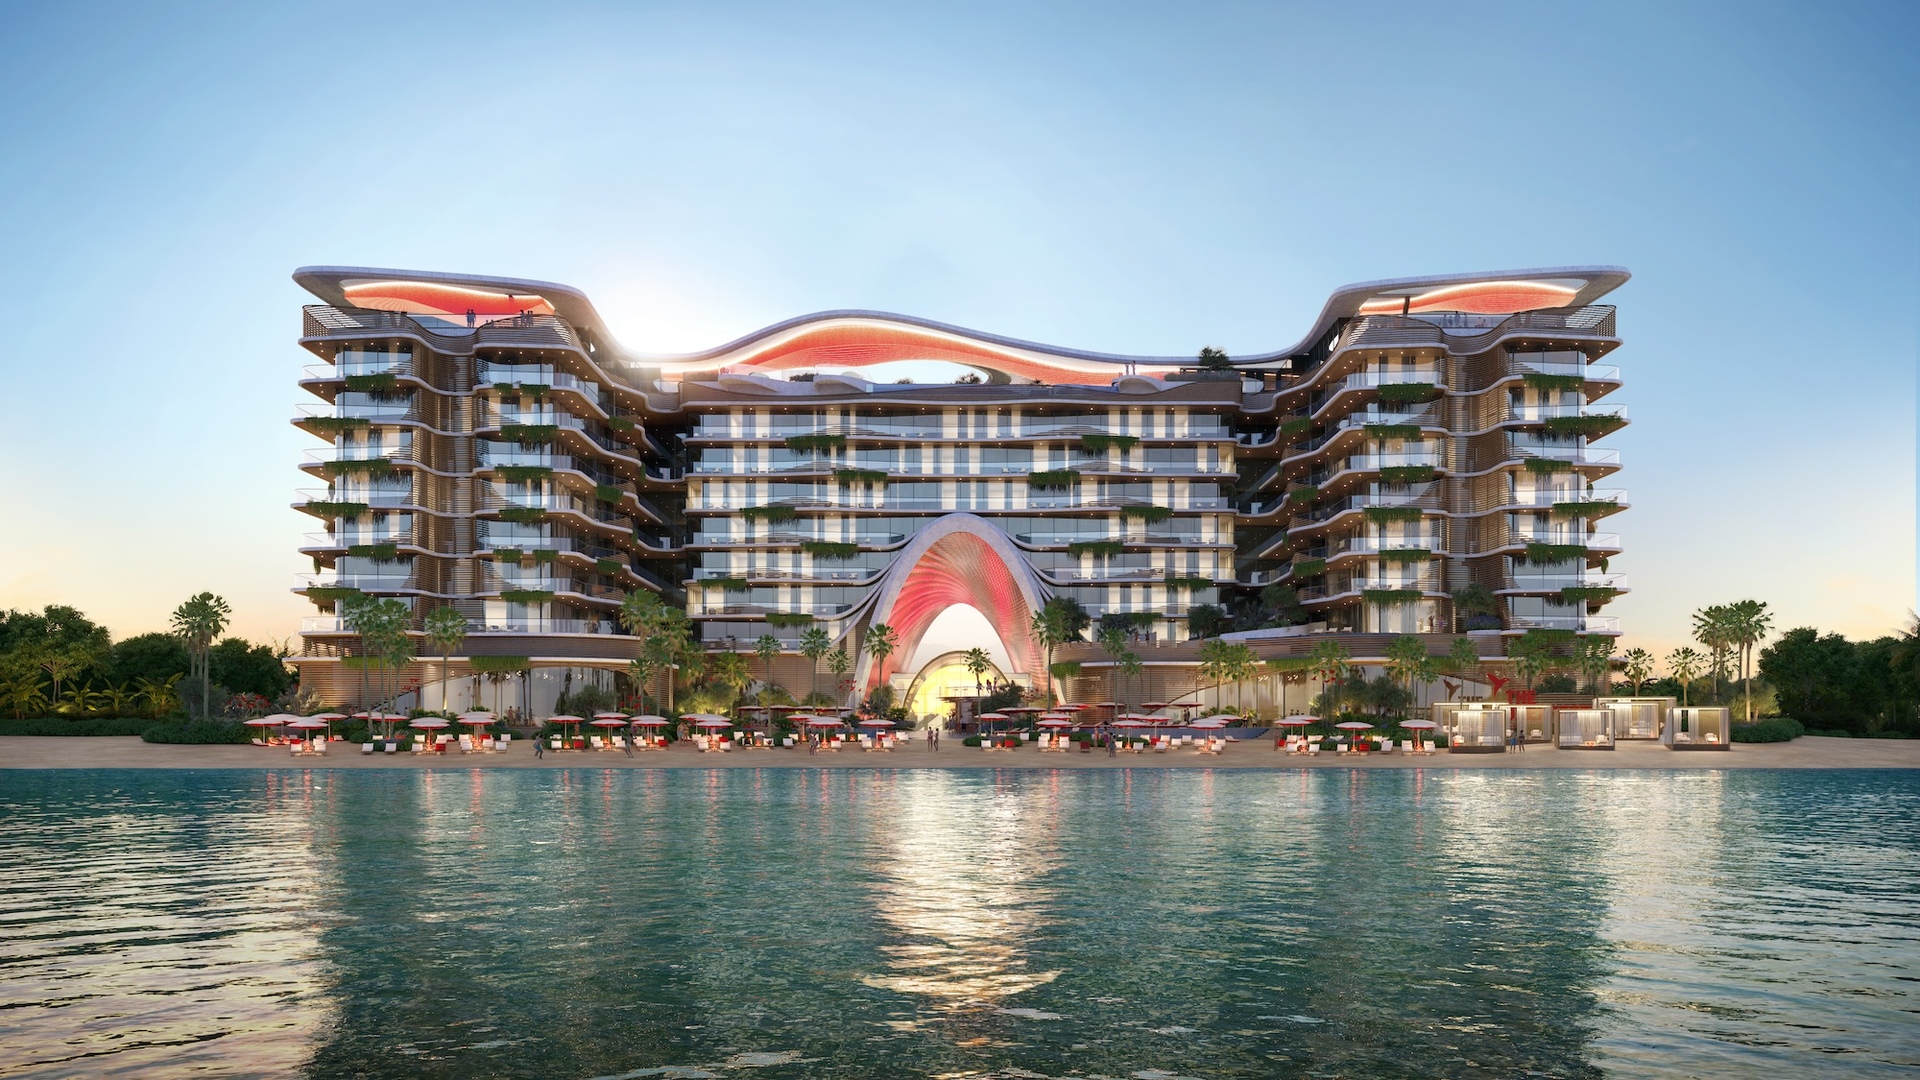 Almal Real Estate Development Launches Flagship Project: The Unexpected Al Marjan Island Hotel & Residences in Ras Al Khaimah